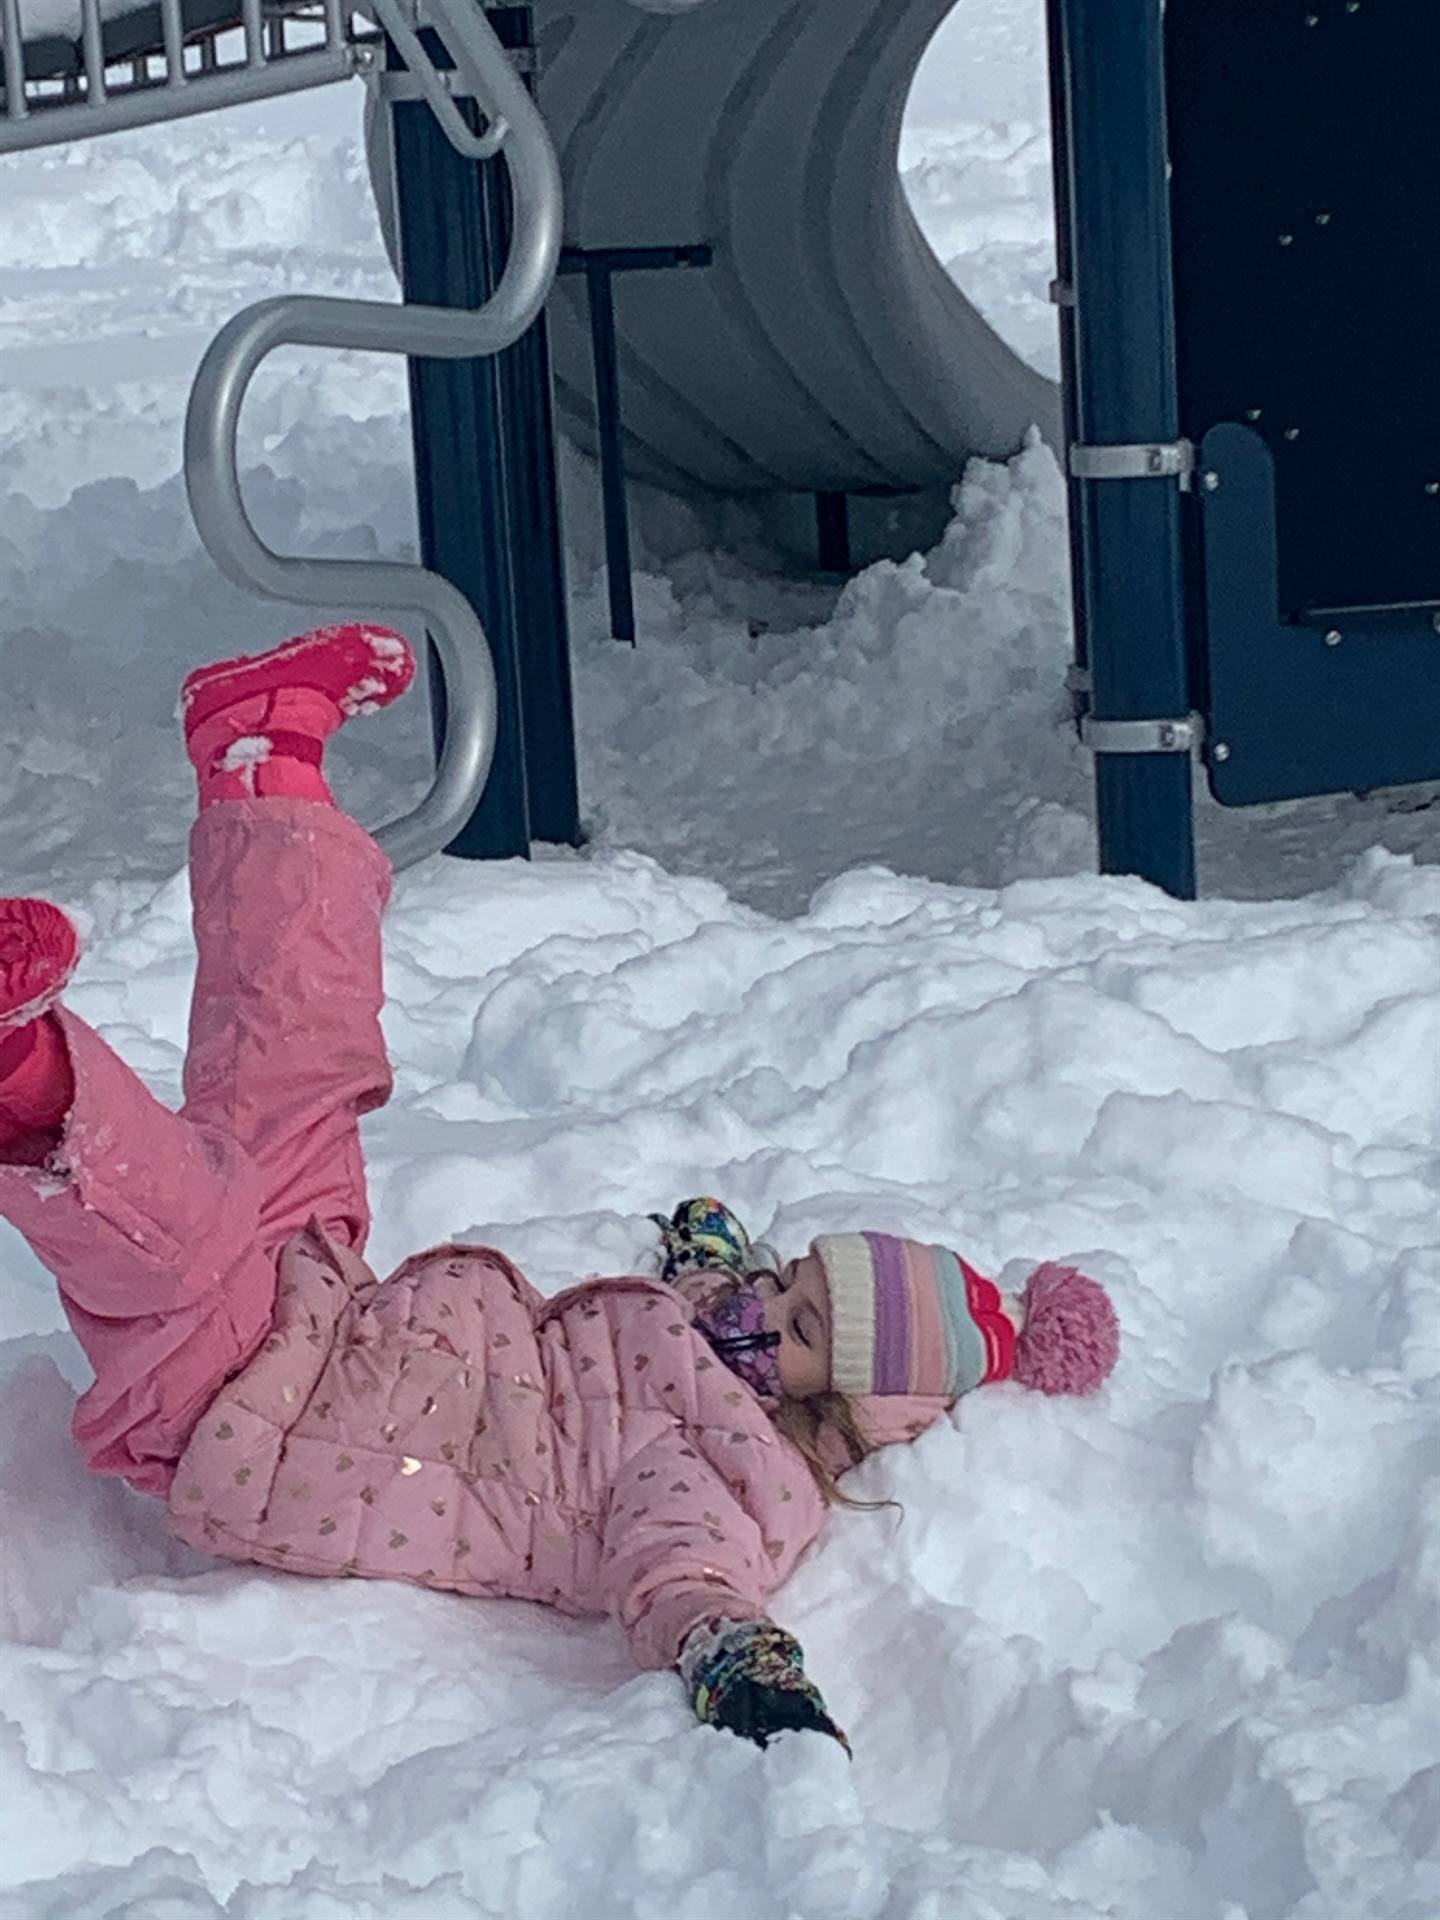 A student laying in snow kicking up her feet.